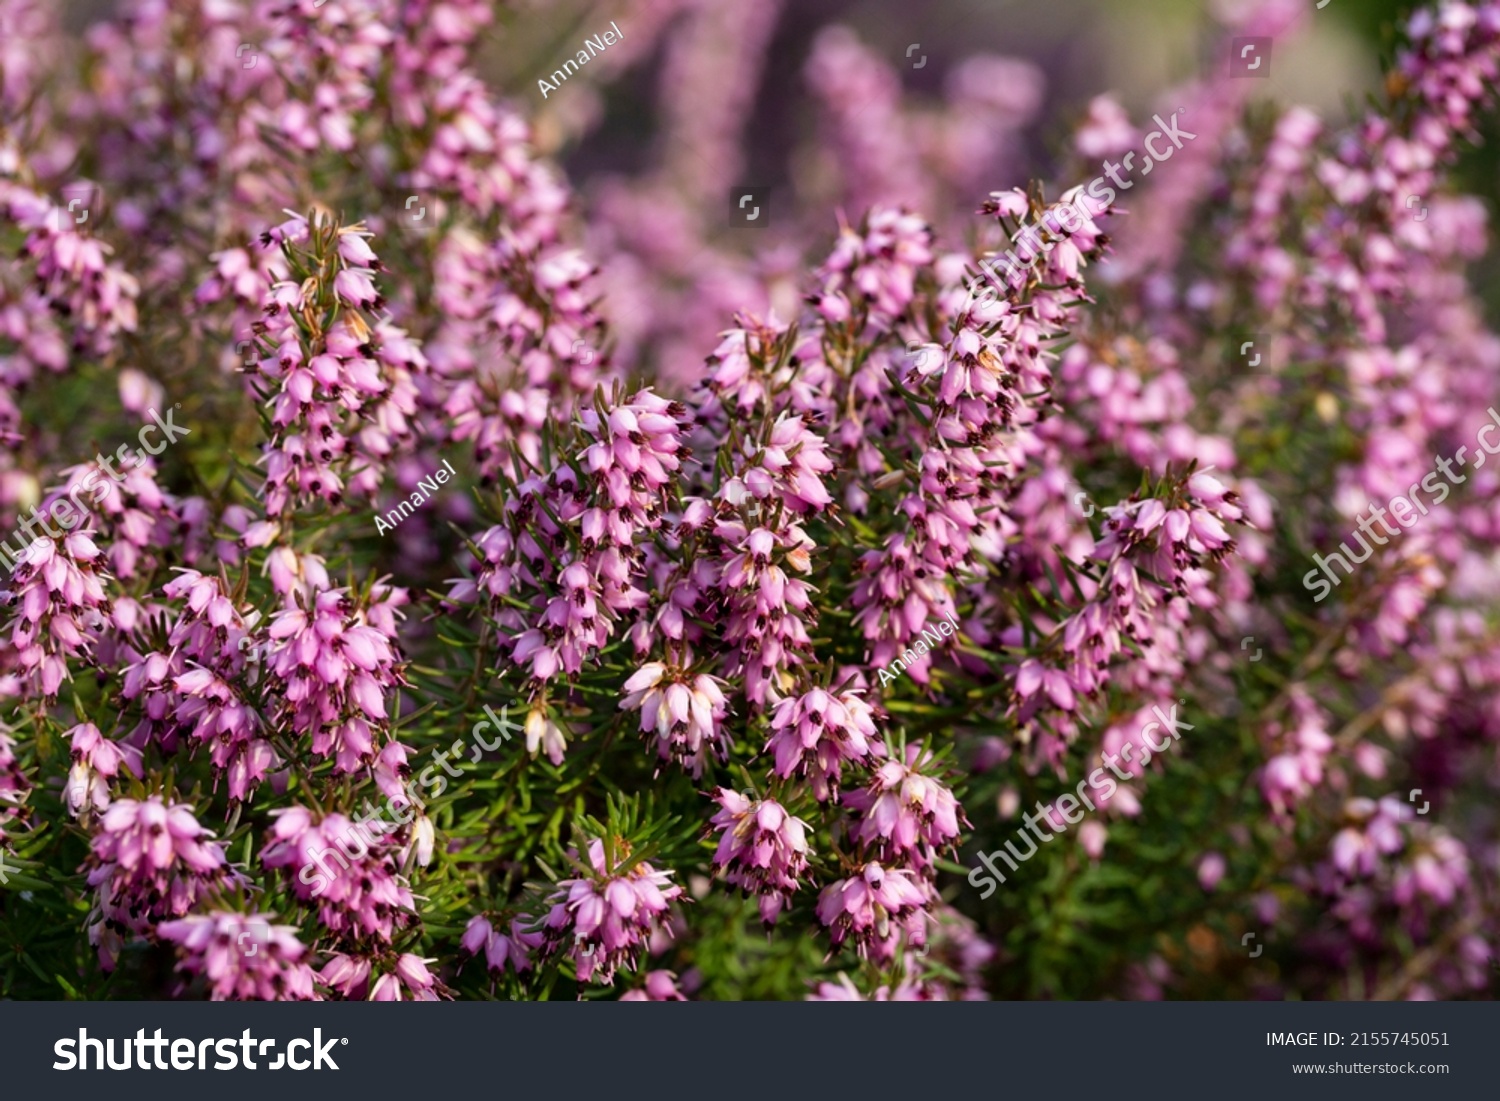 Close up flowering Calluna vulgaris common heather, ling, or simply heather Selective focus of the purple flowers on the field, Nature floral background. #2155745051